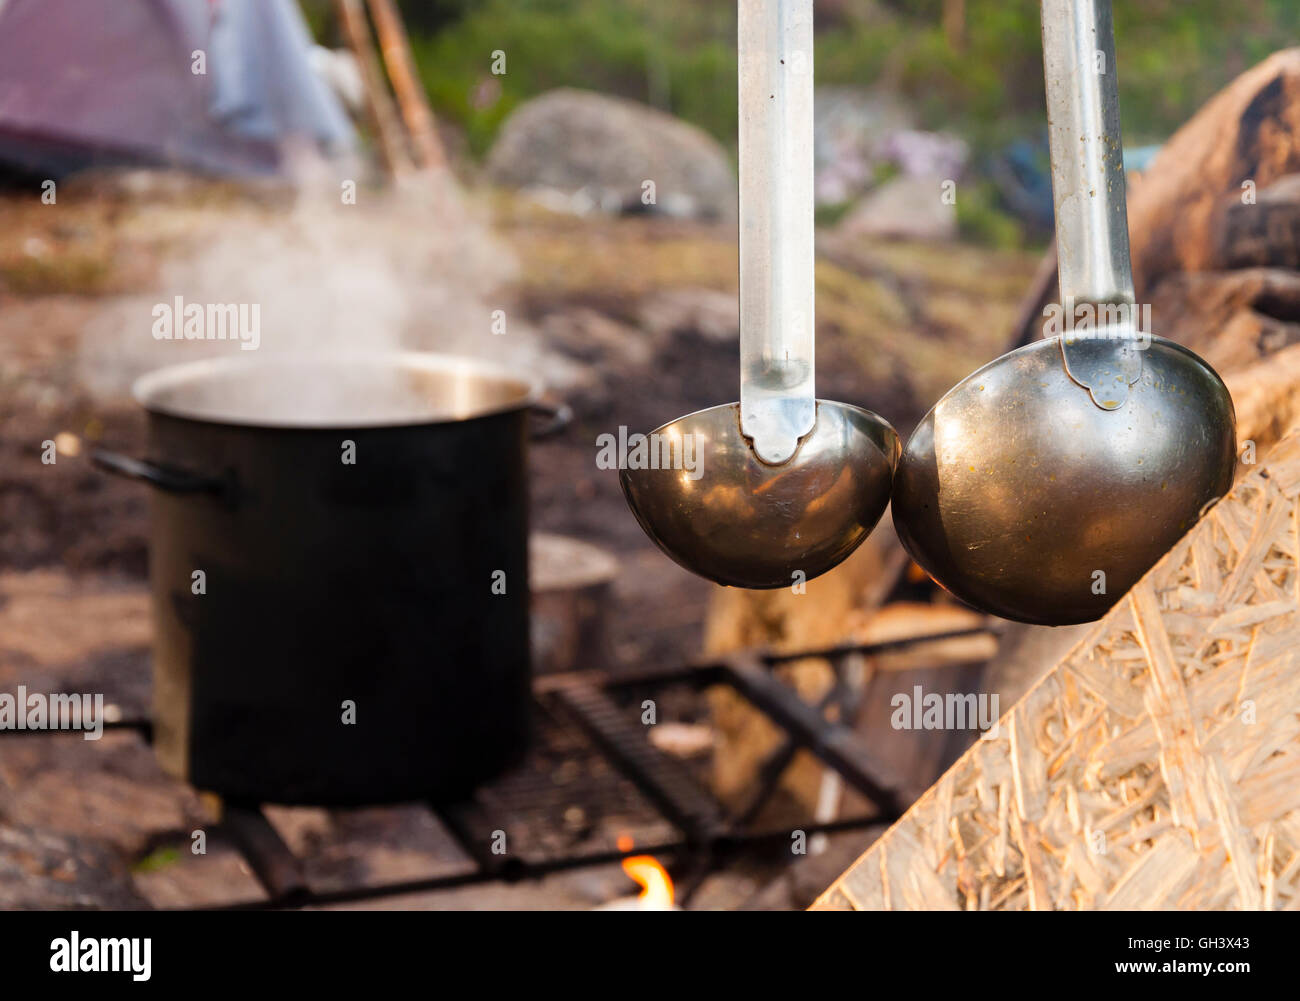 https://c8.alamy.com/comp/GH3X43/cooking-food-in-the-nature-big-pot-on-fire-and-ladle-in-forest-GH3X43.jpg